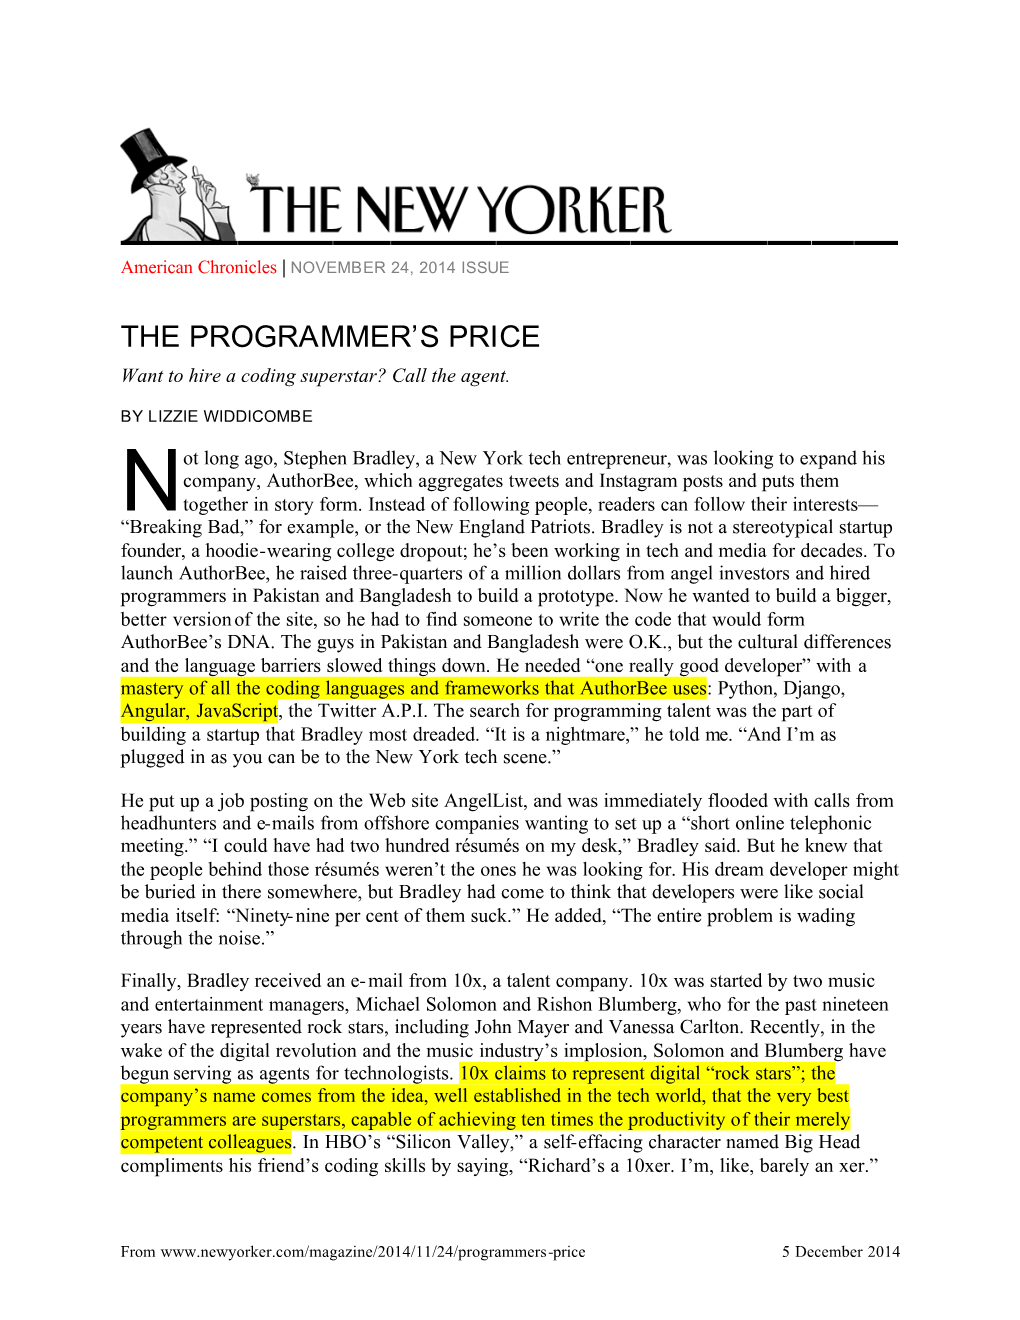 The Programmer's Price